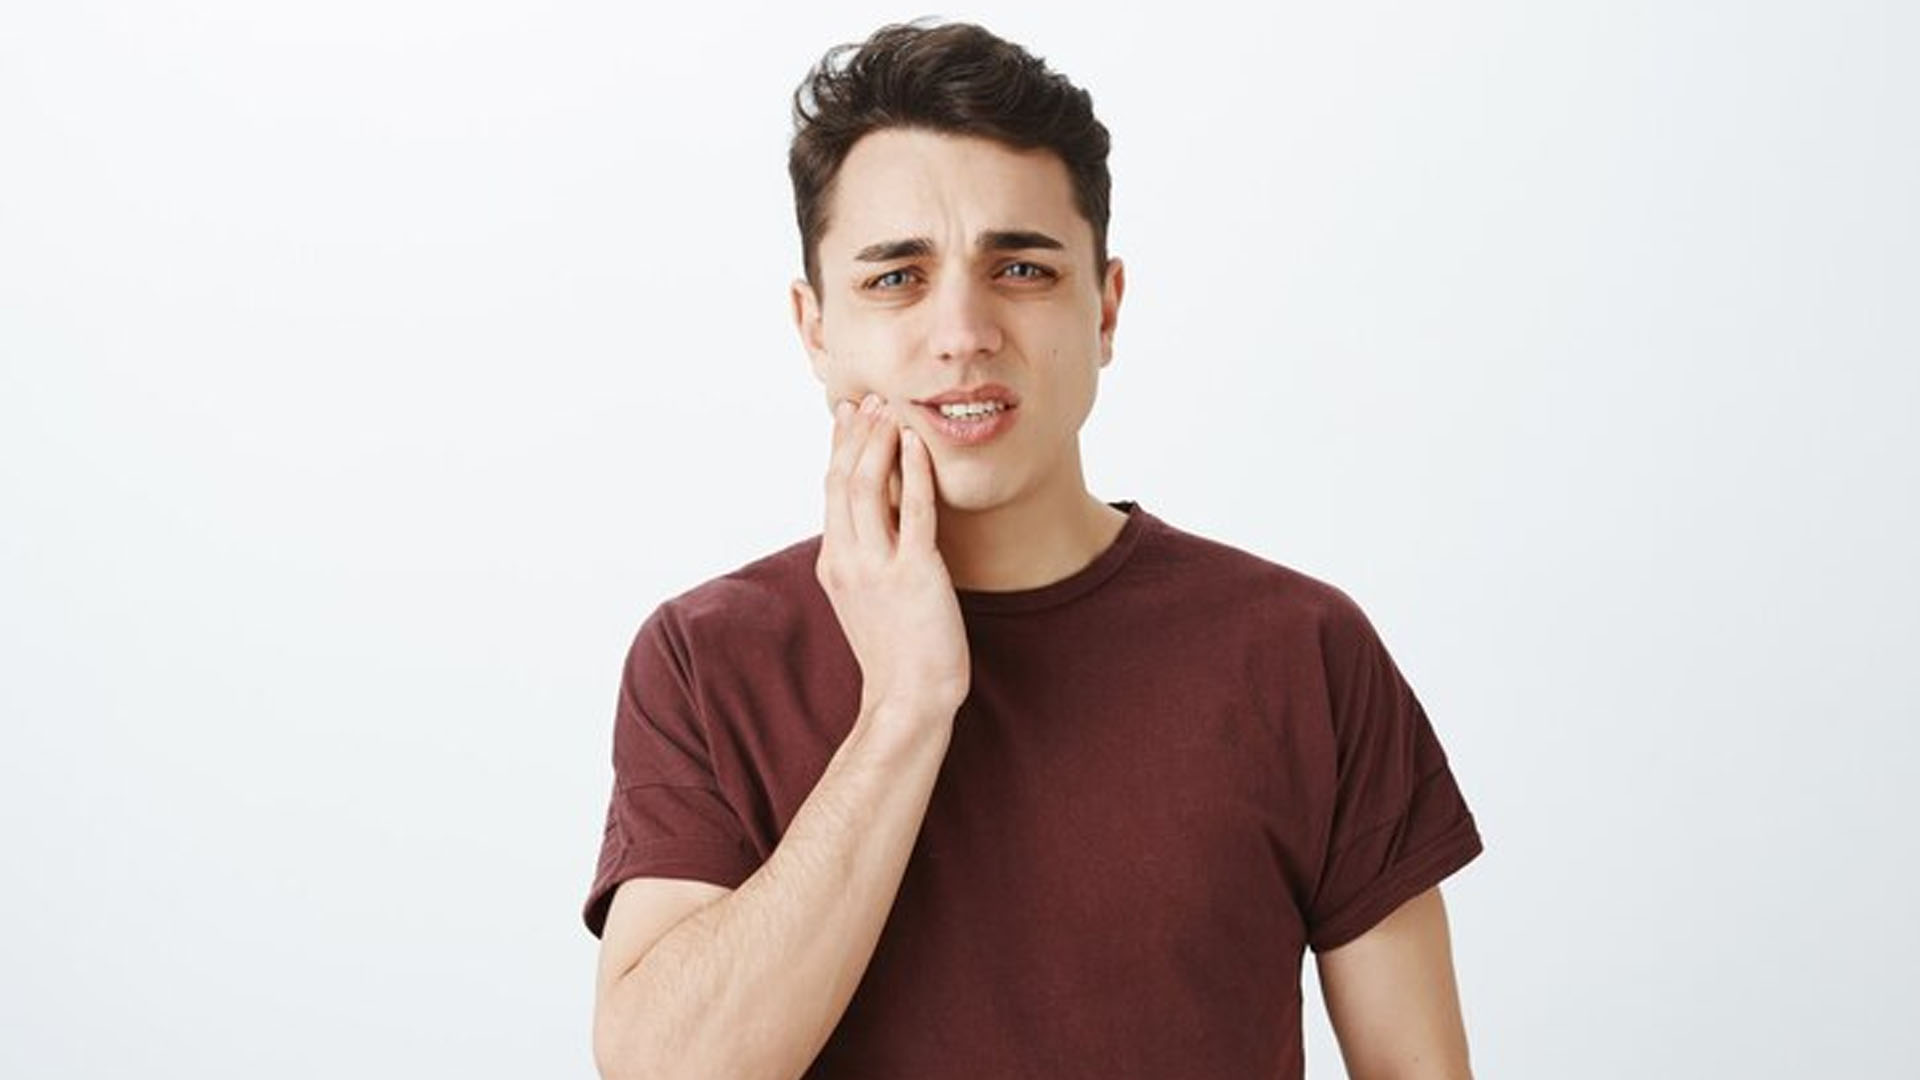 What are the Home Remedies for Sensitive Teeth?